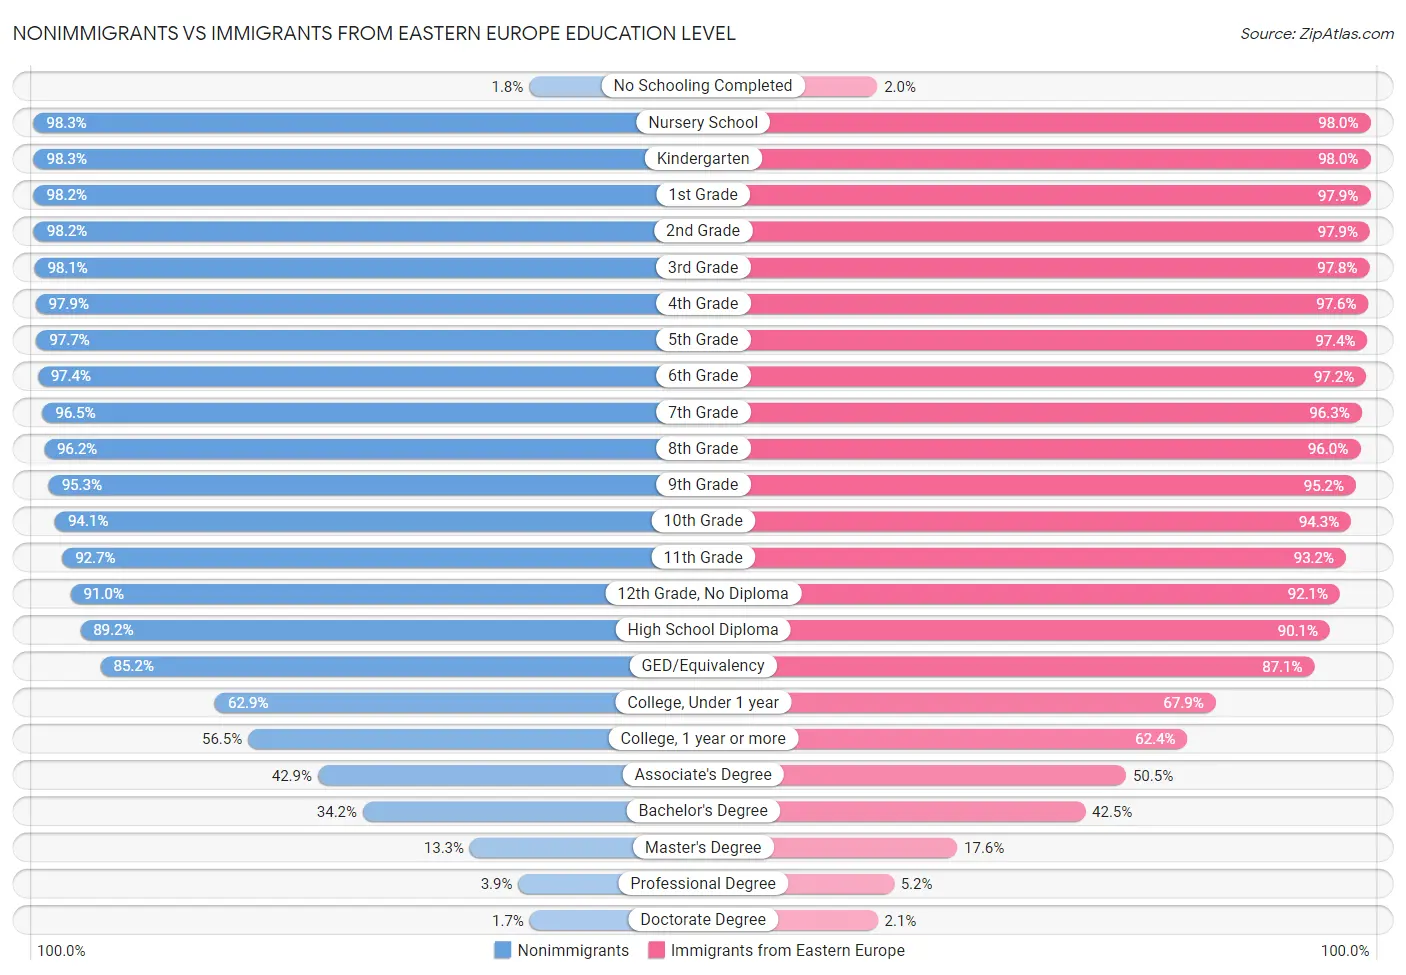 Nonimmigrants vs Immigrants from Eastern Europe Education Level